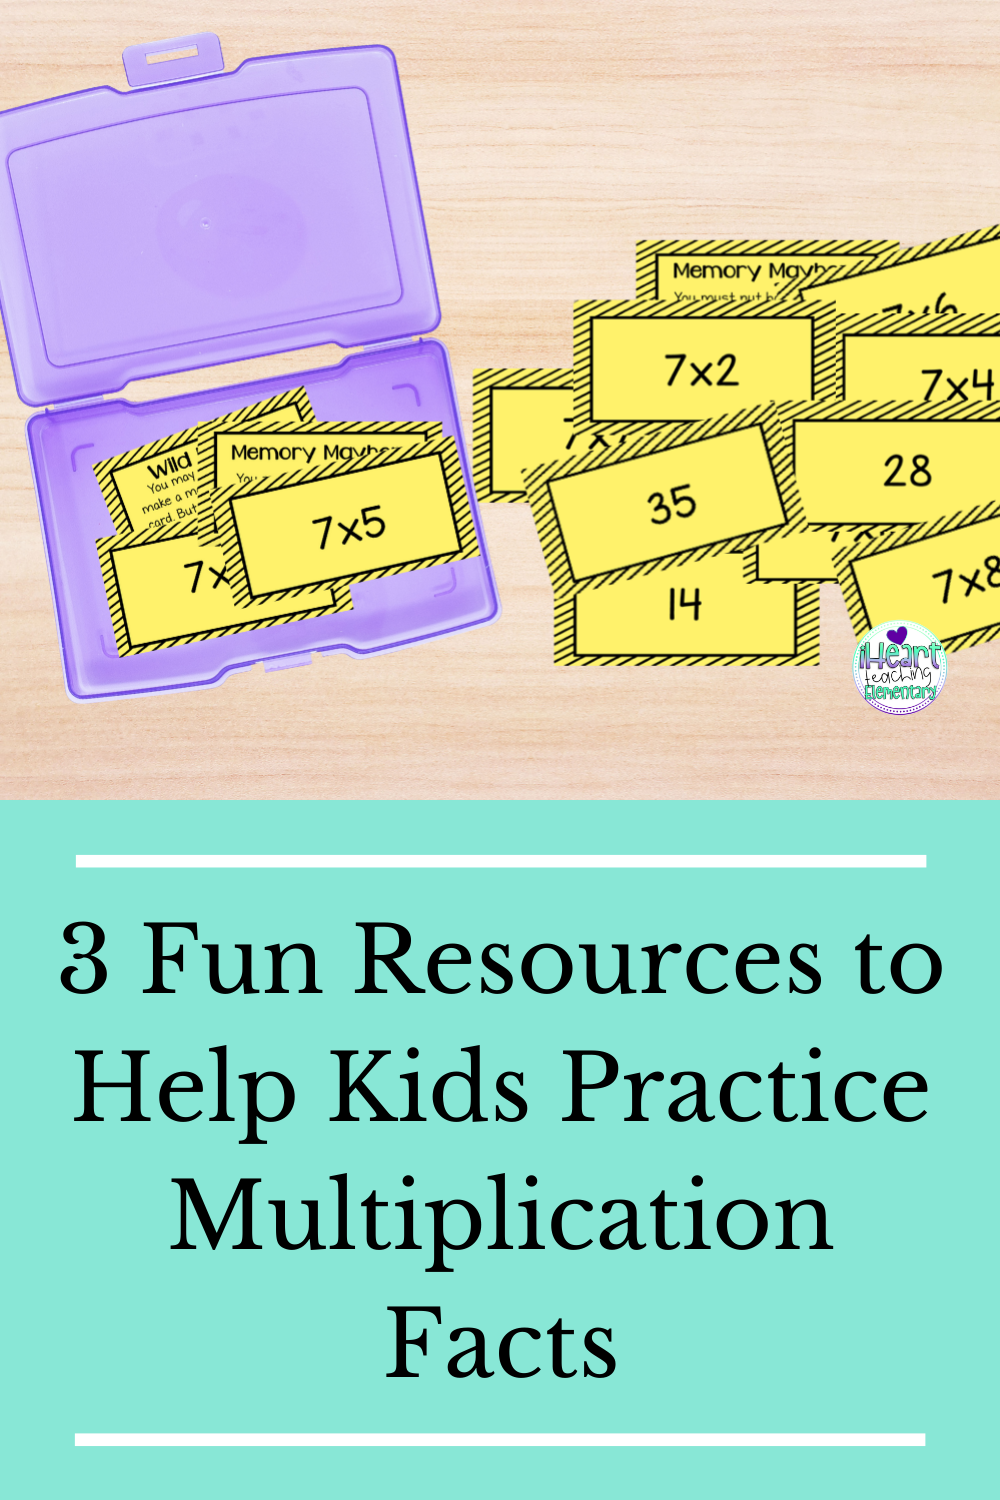 3-fun-resources-to-help-kids-practice-multiplication-facts